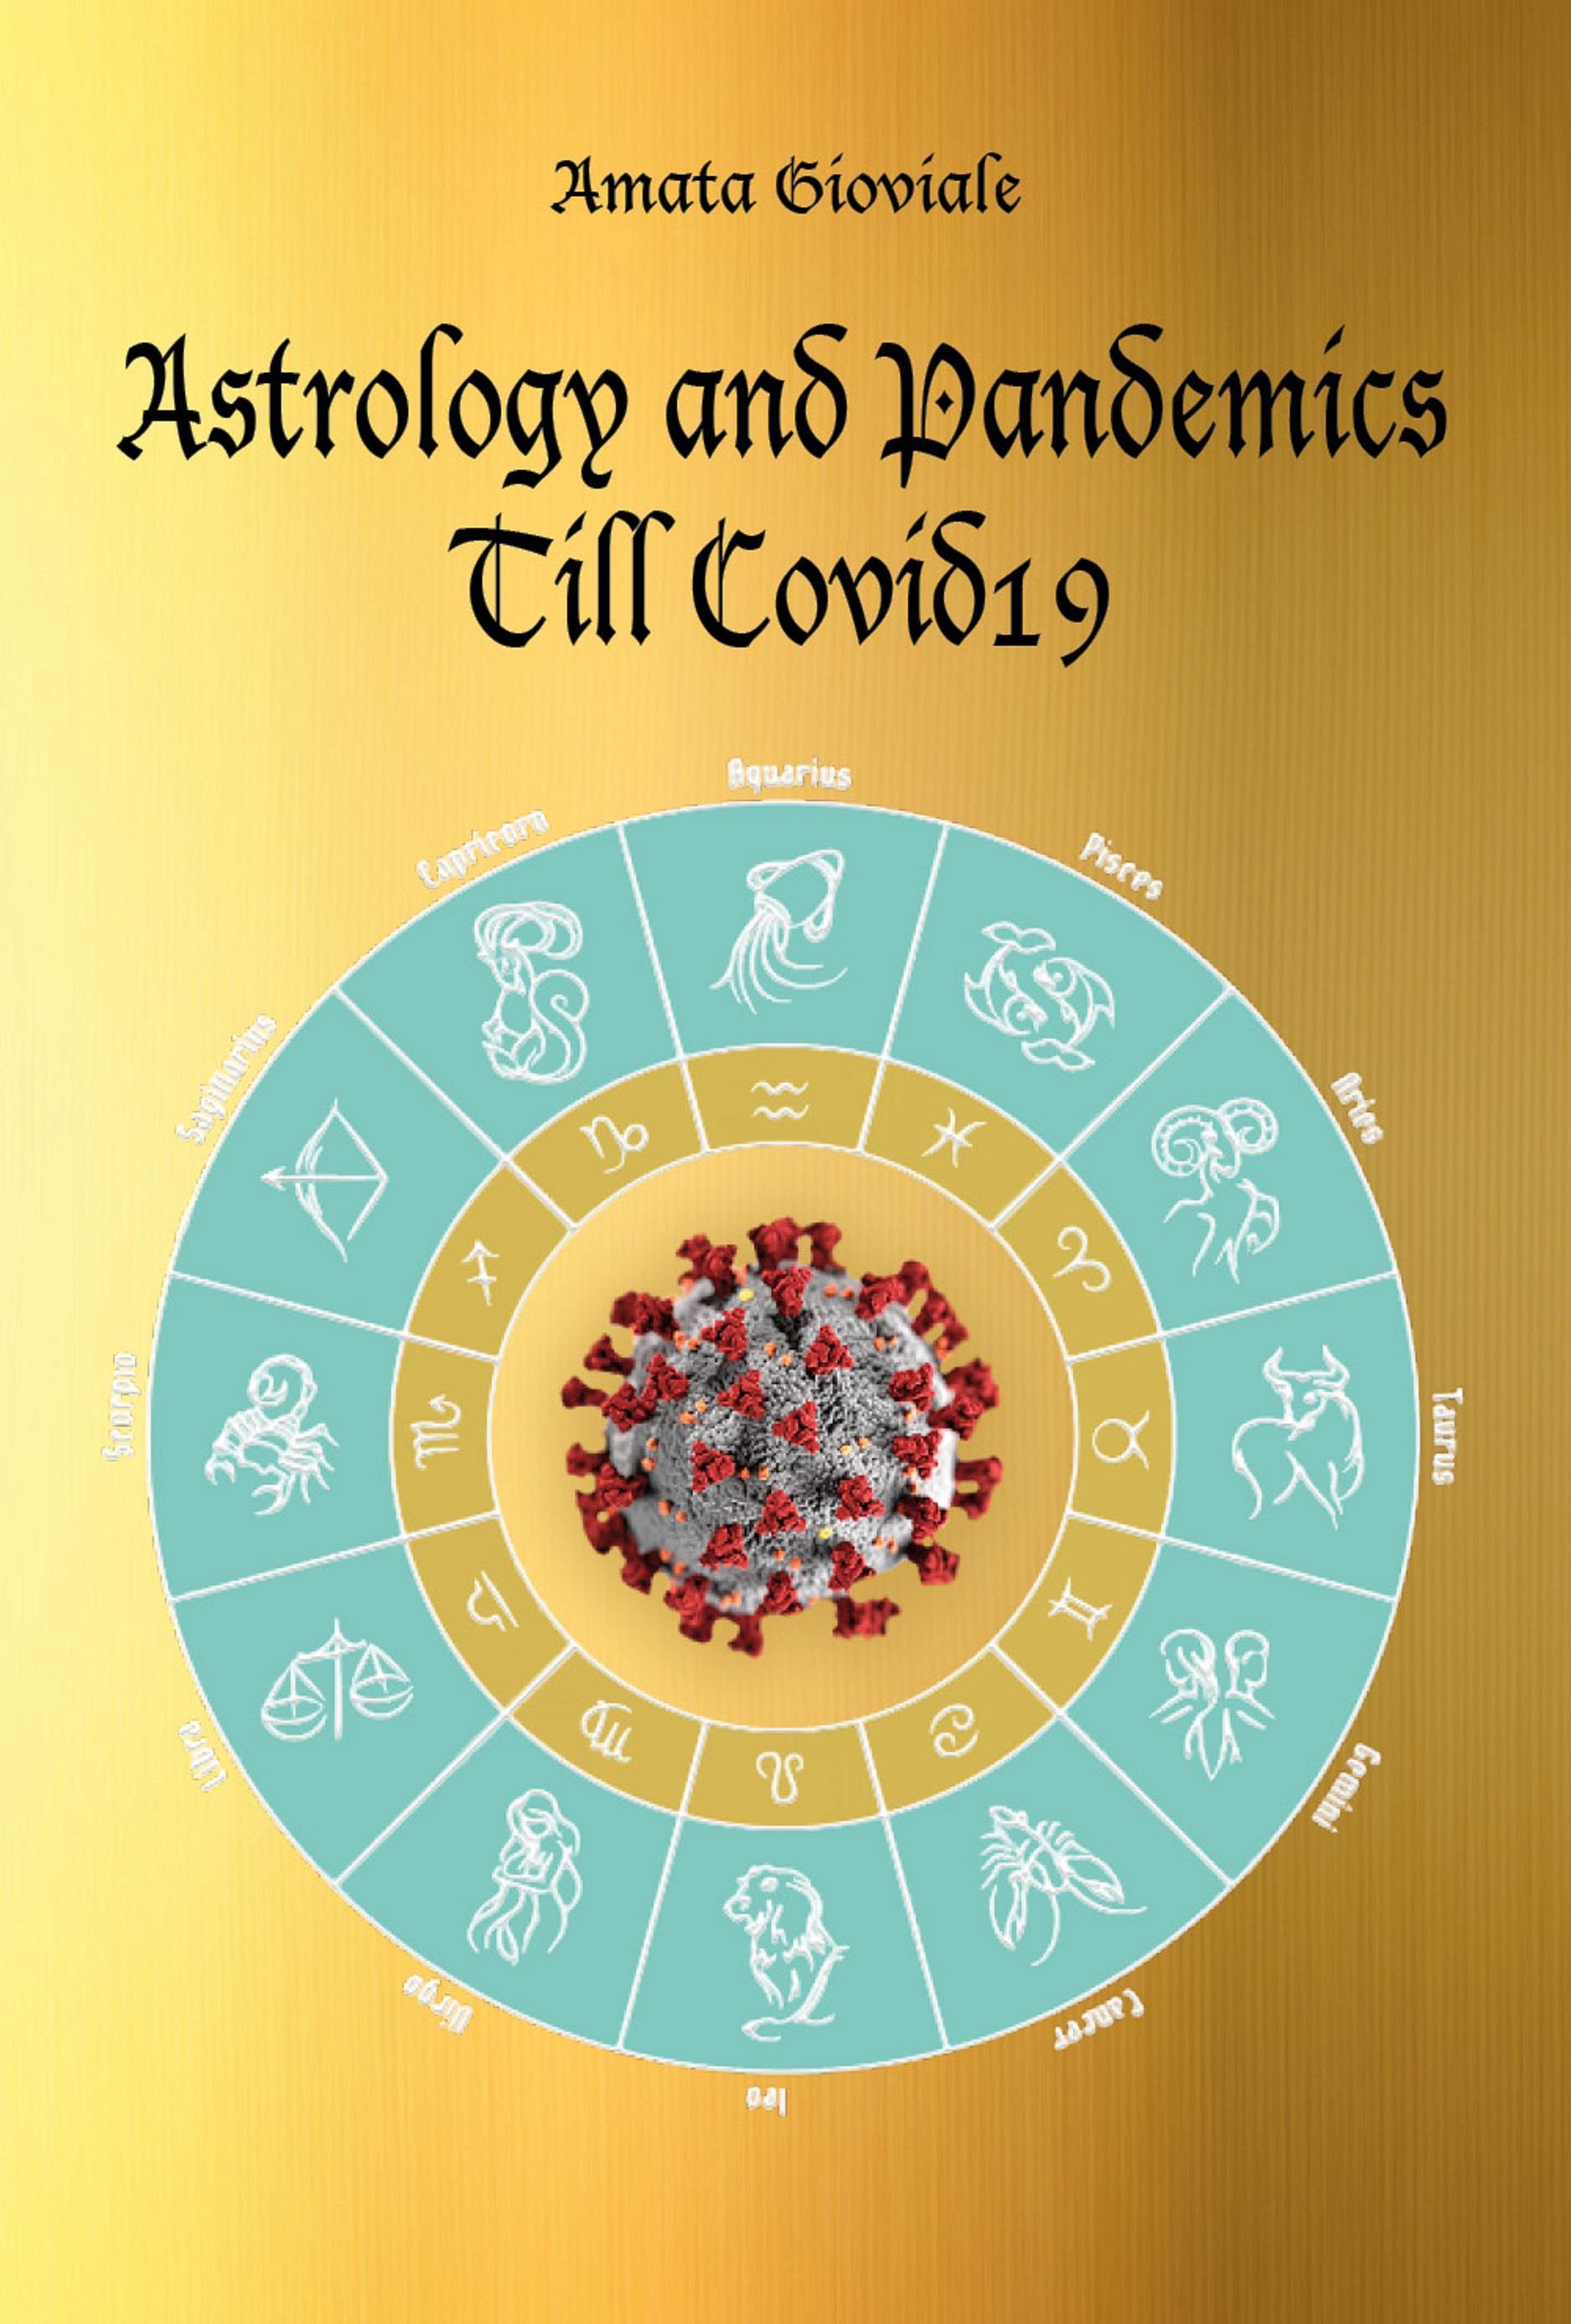 Astrology and Pandemics Till Covid19